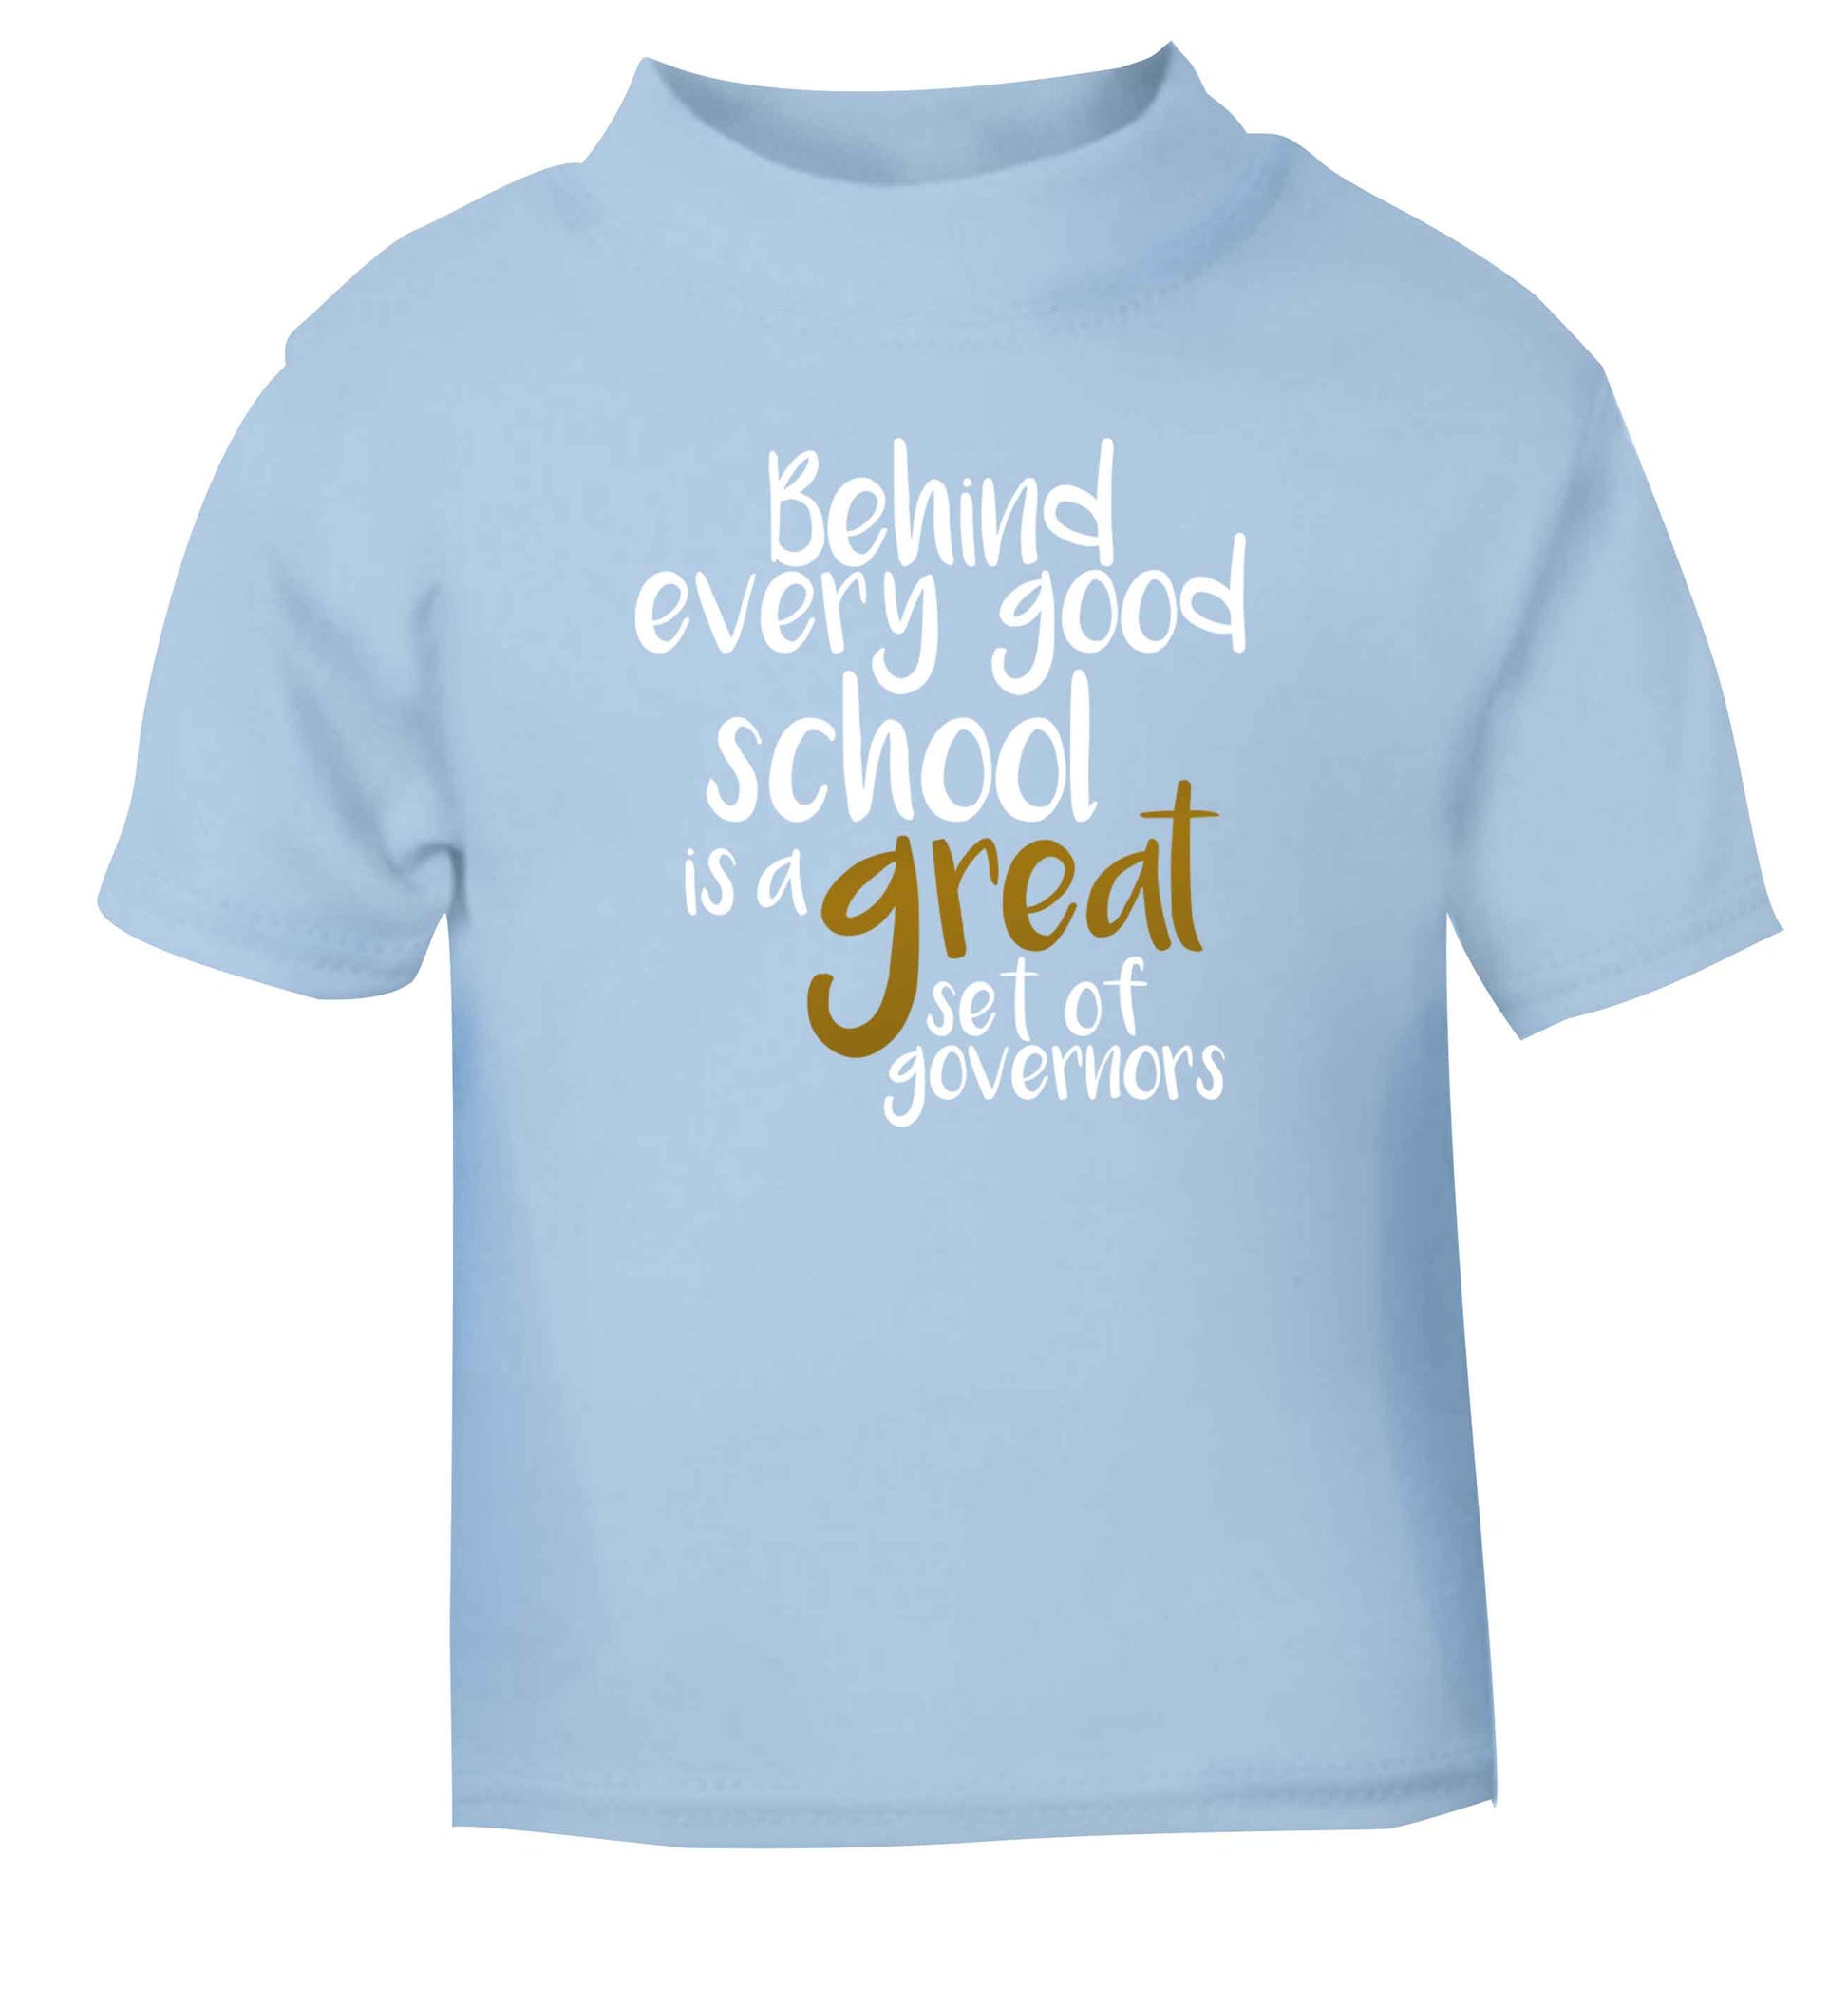 Behind every good school is a great set of governors light blue Baby Toddler Tshirt 2 Years